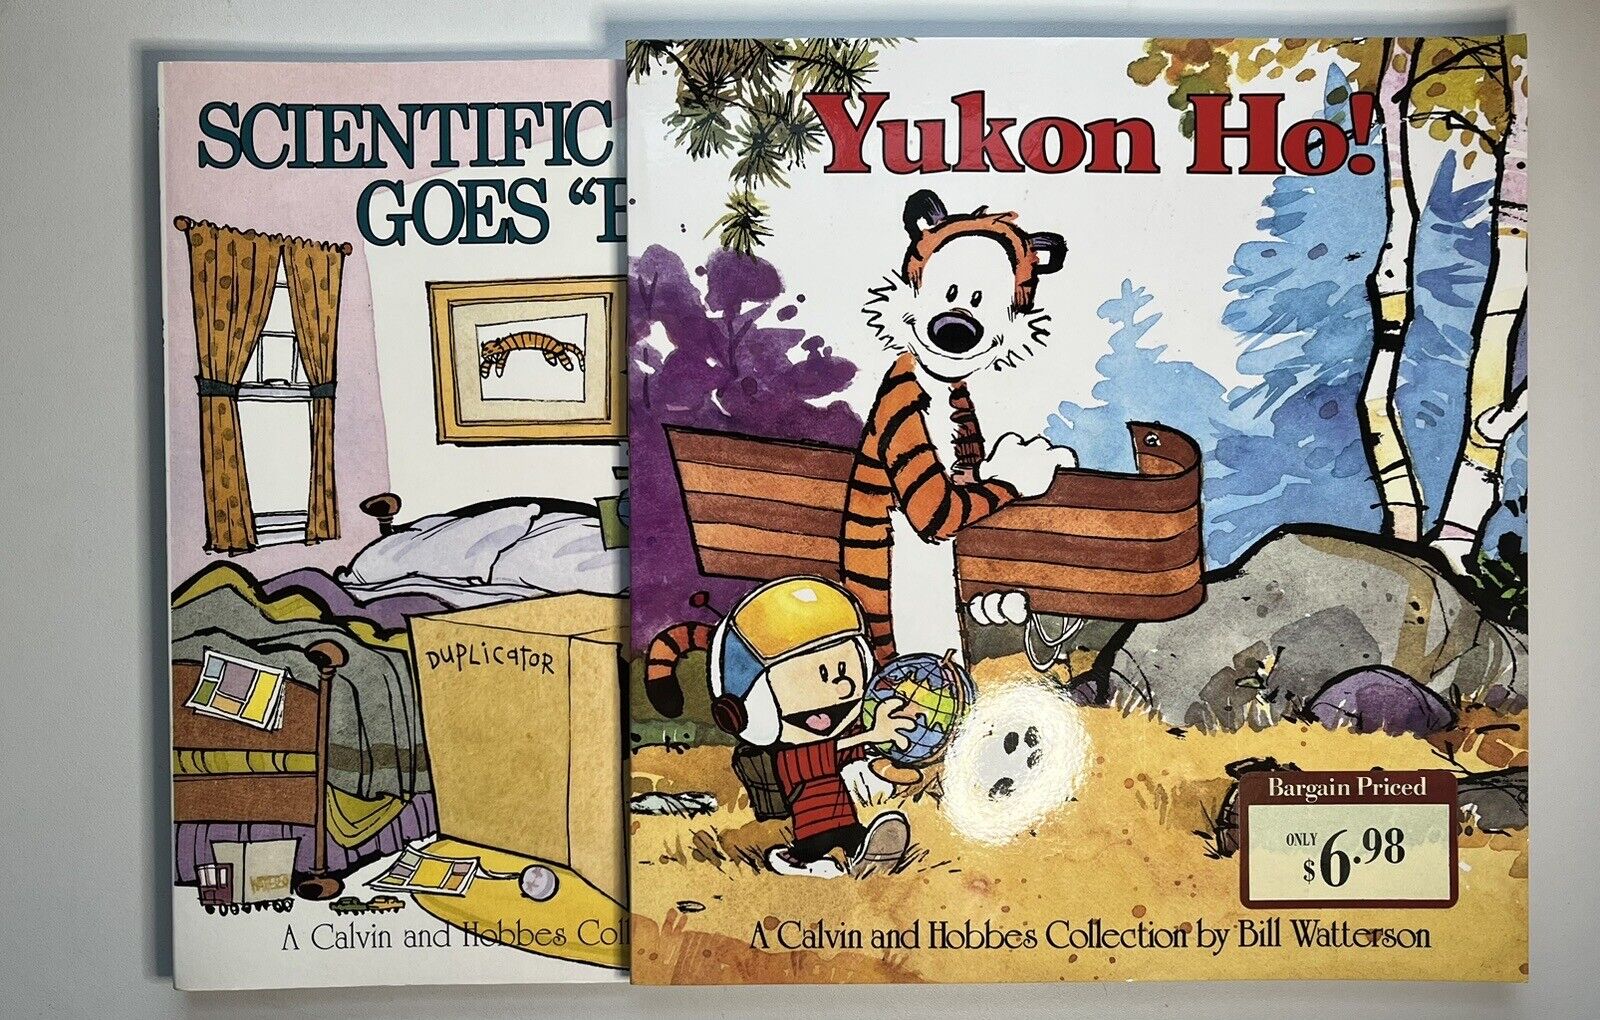 Yukon Ho And Scientific Goes A Calvin and Hobbes Collection by Bill Watterson